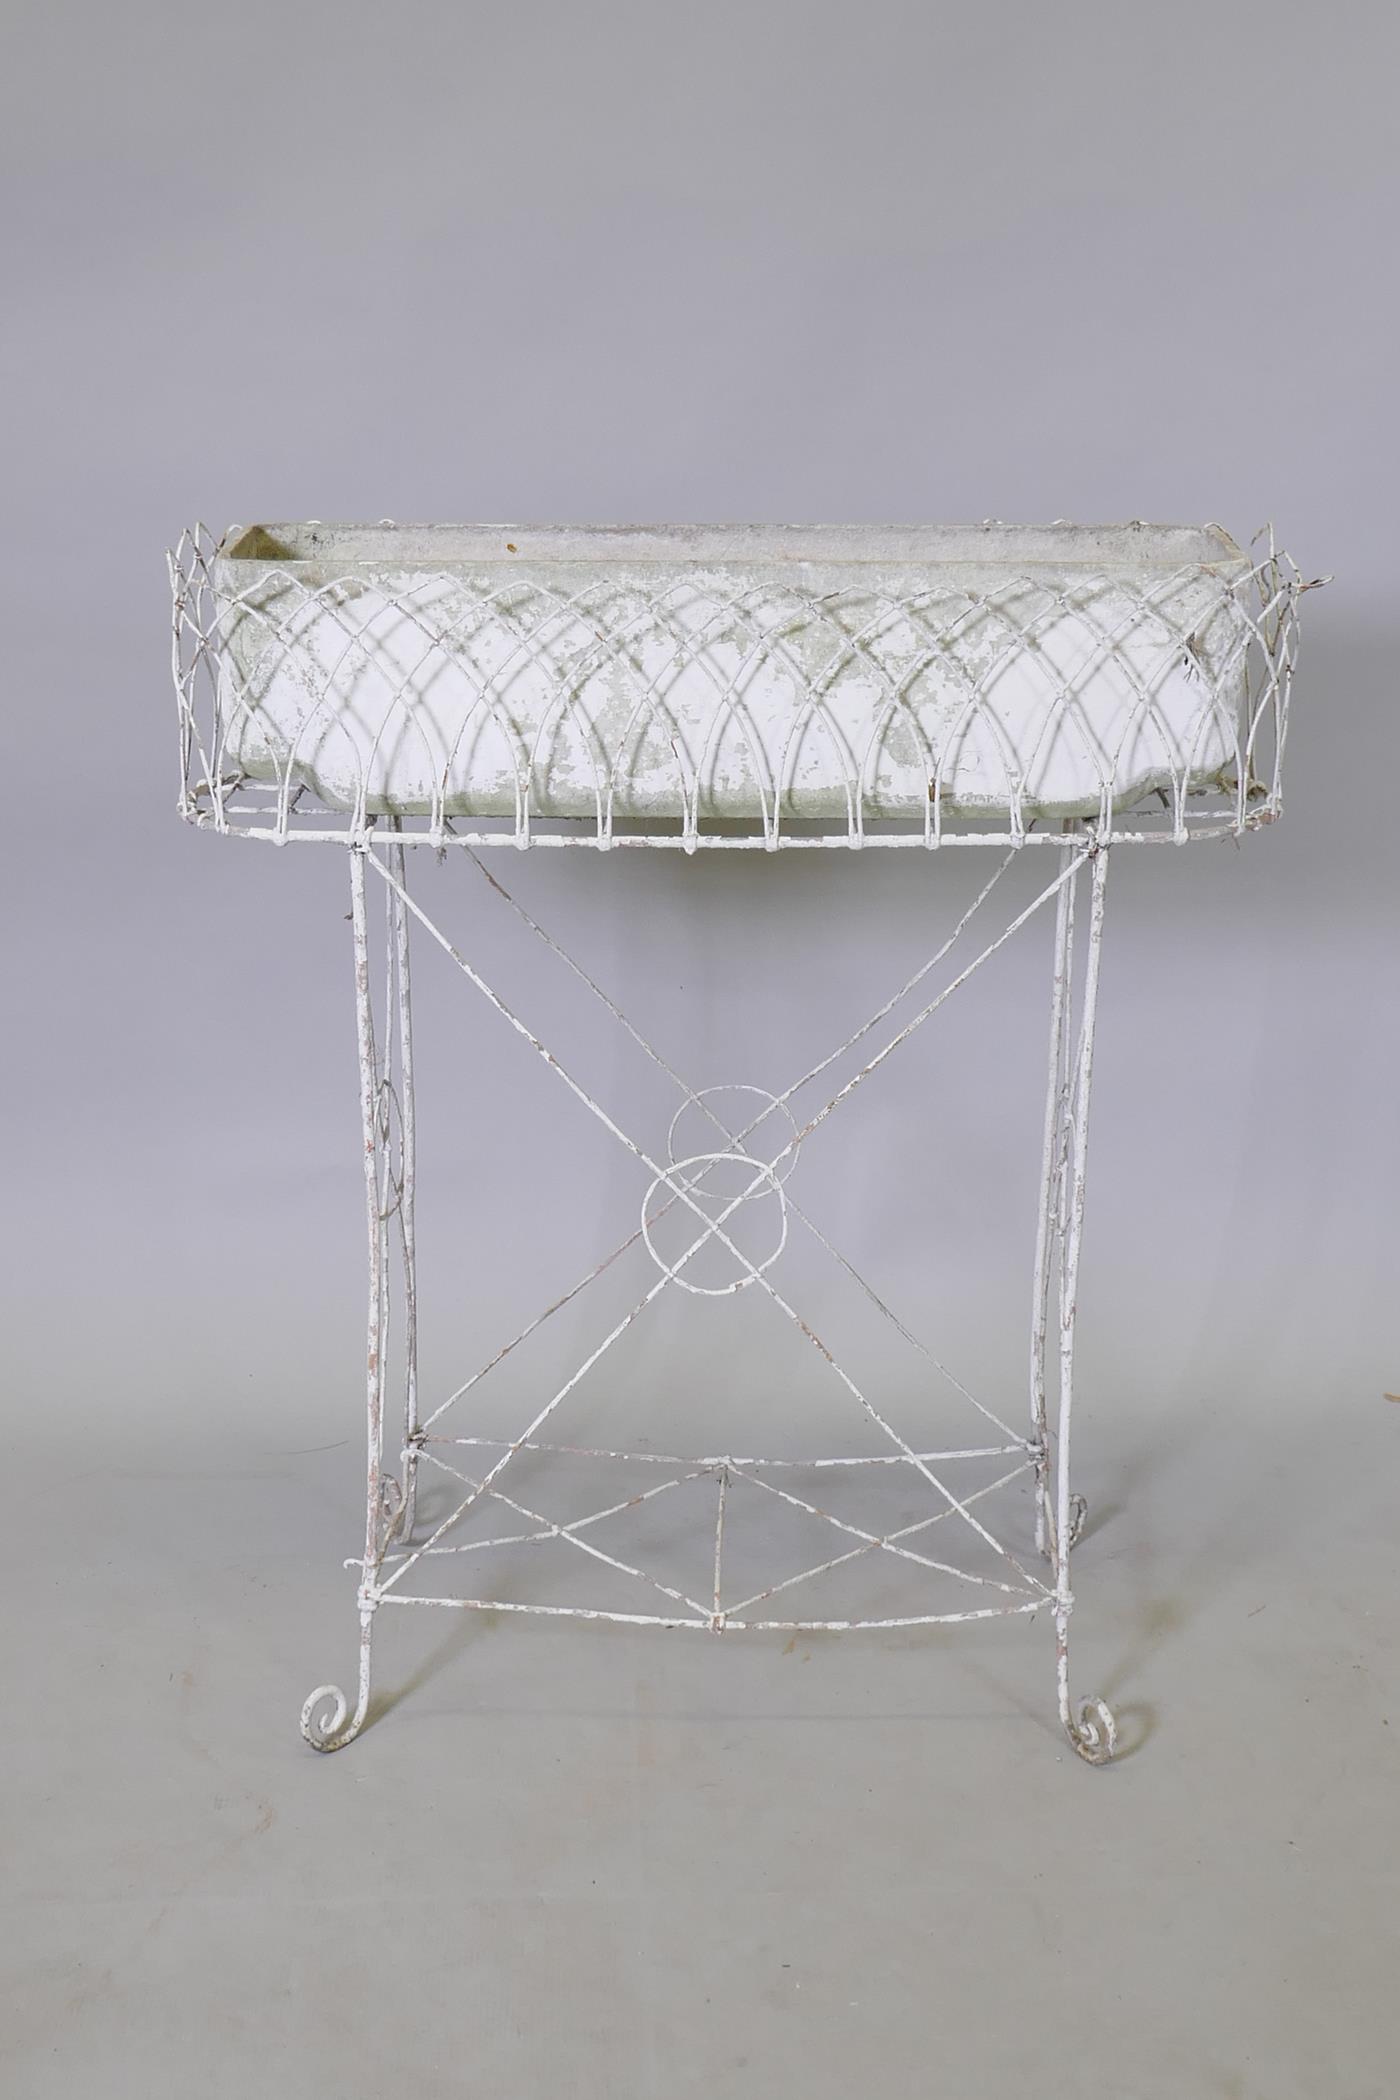 A C19th painted wire garden trough stand, 70 x 77cms